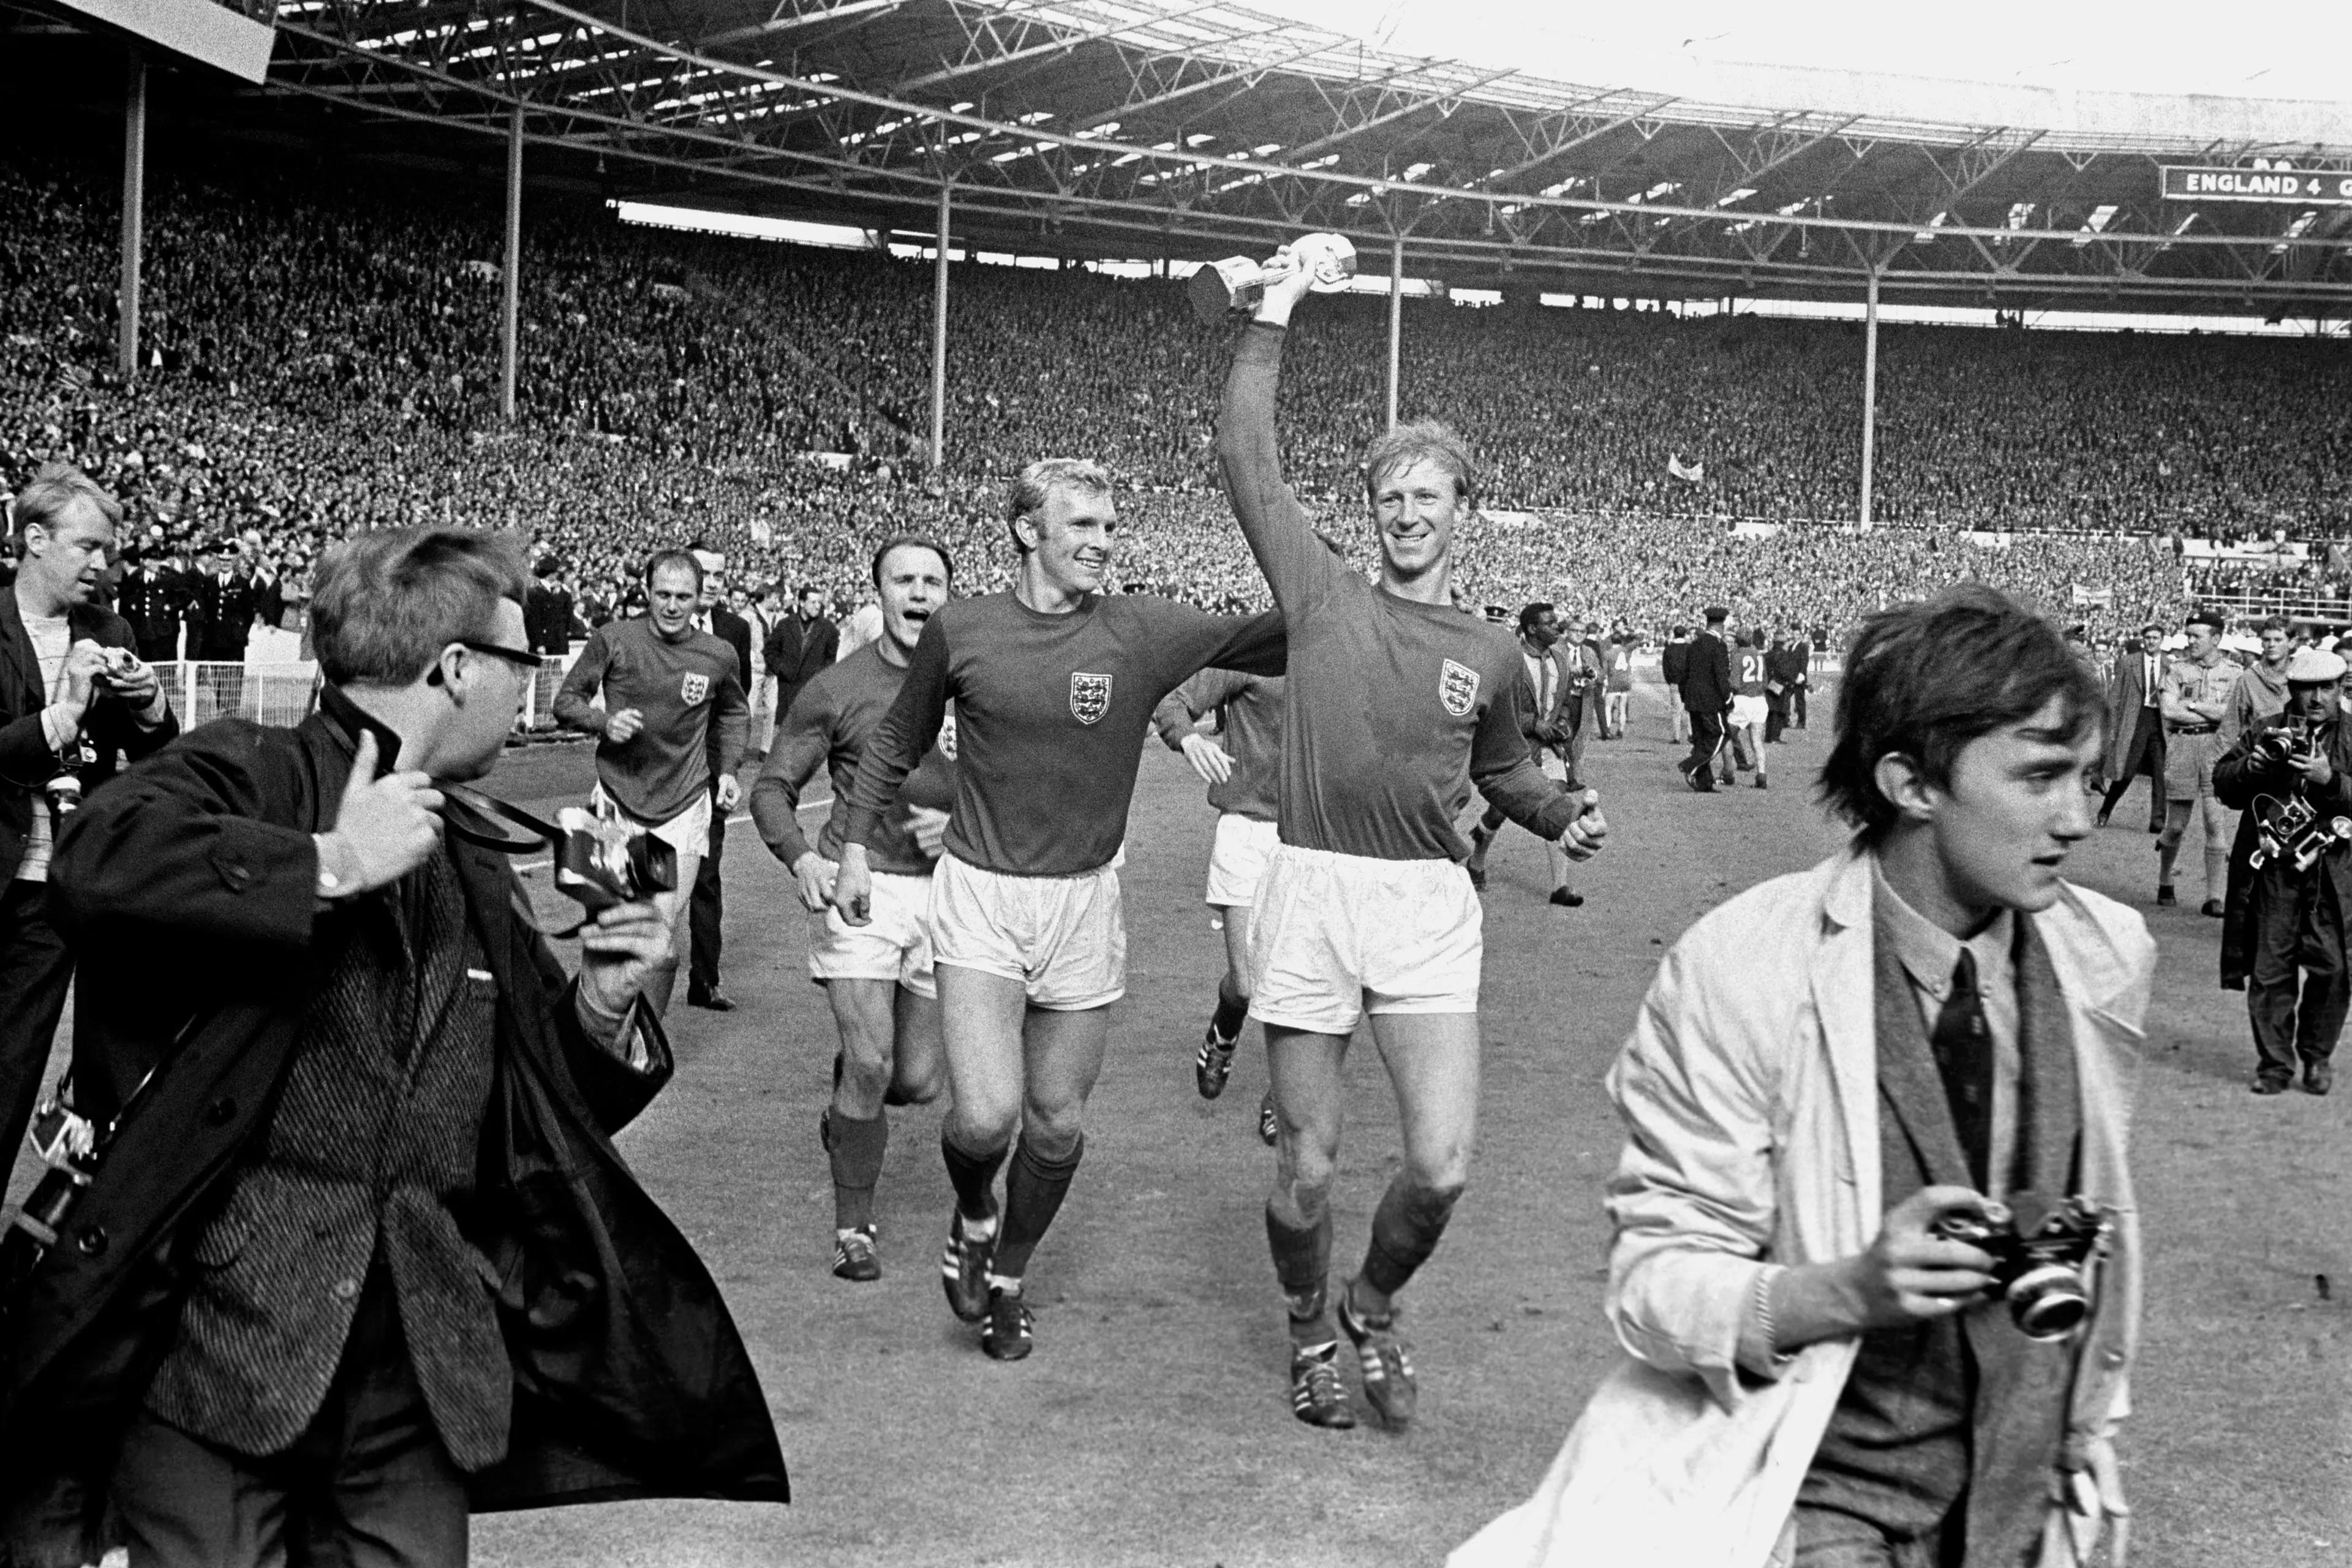 Jack Charlton (right) celebrates with the 1966 England team after they won the World Cup.